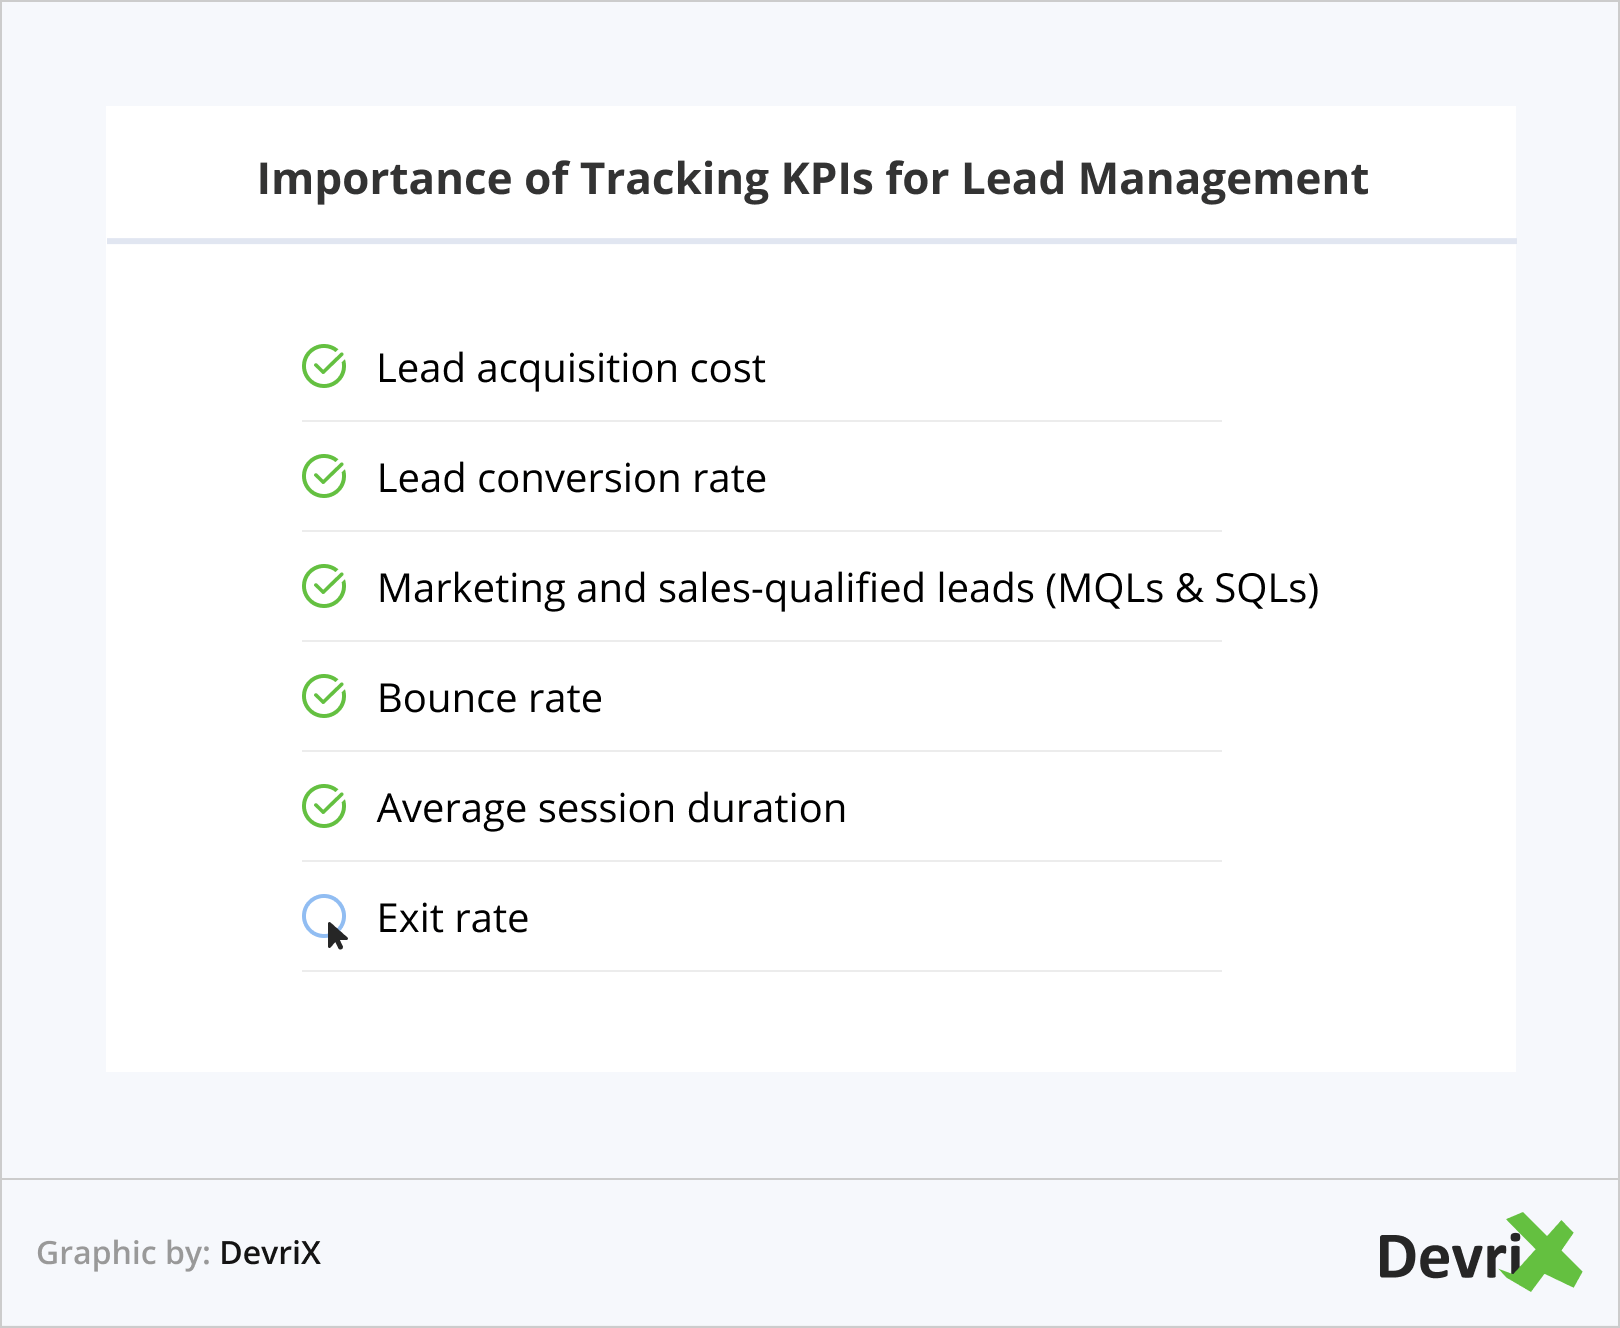 Importance of Tracking KPIs for Lead Management